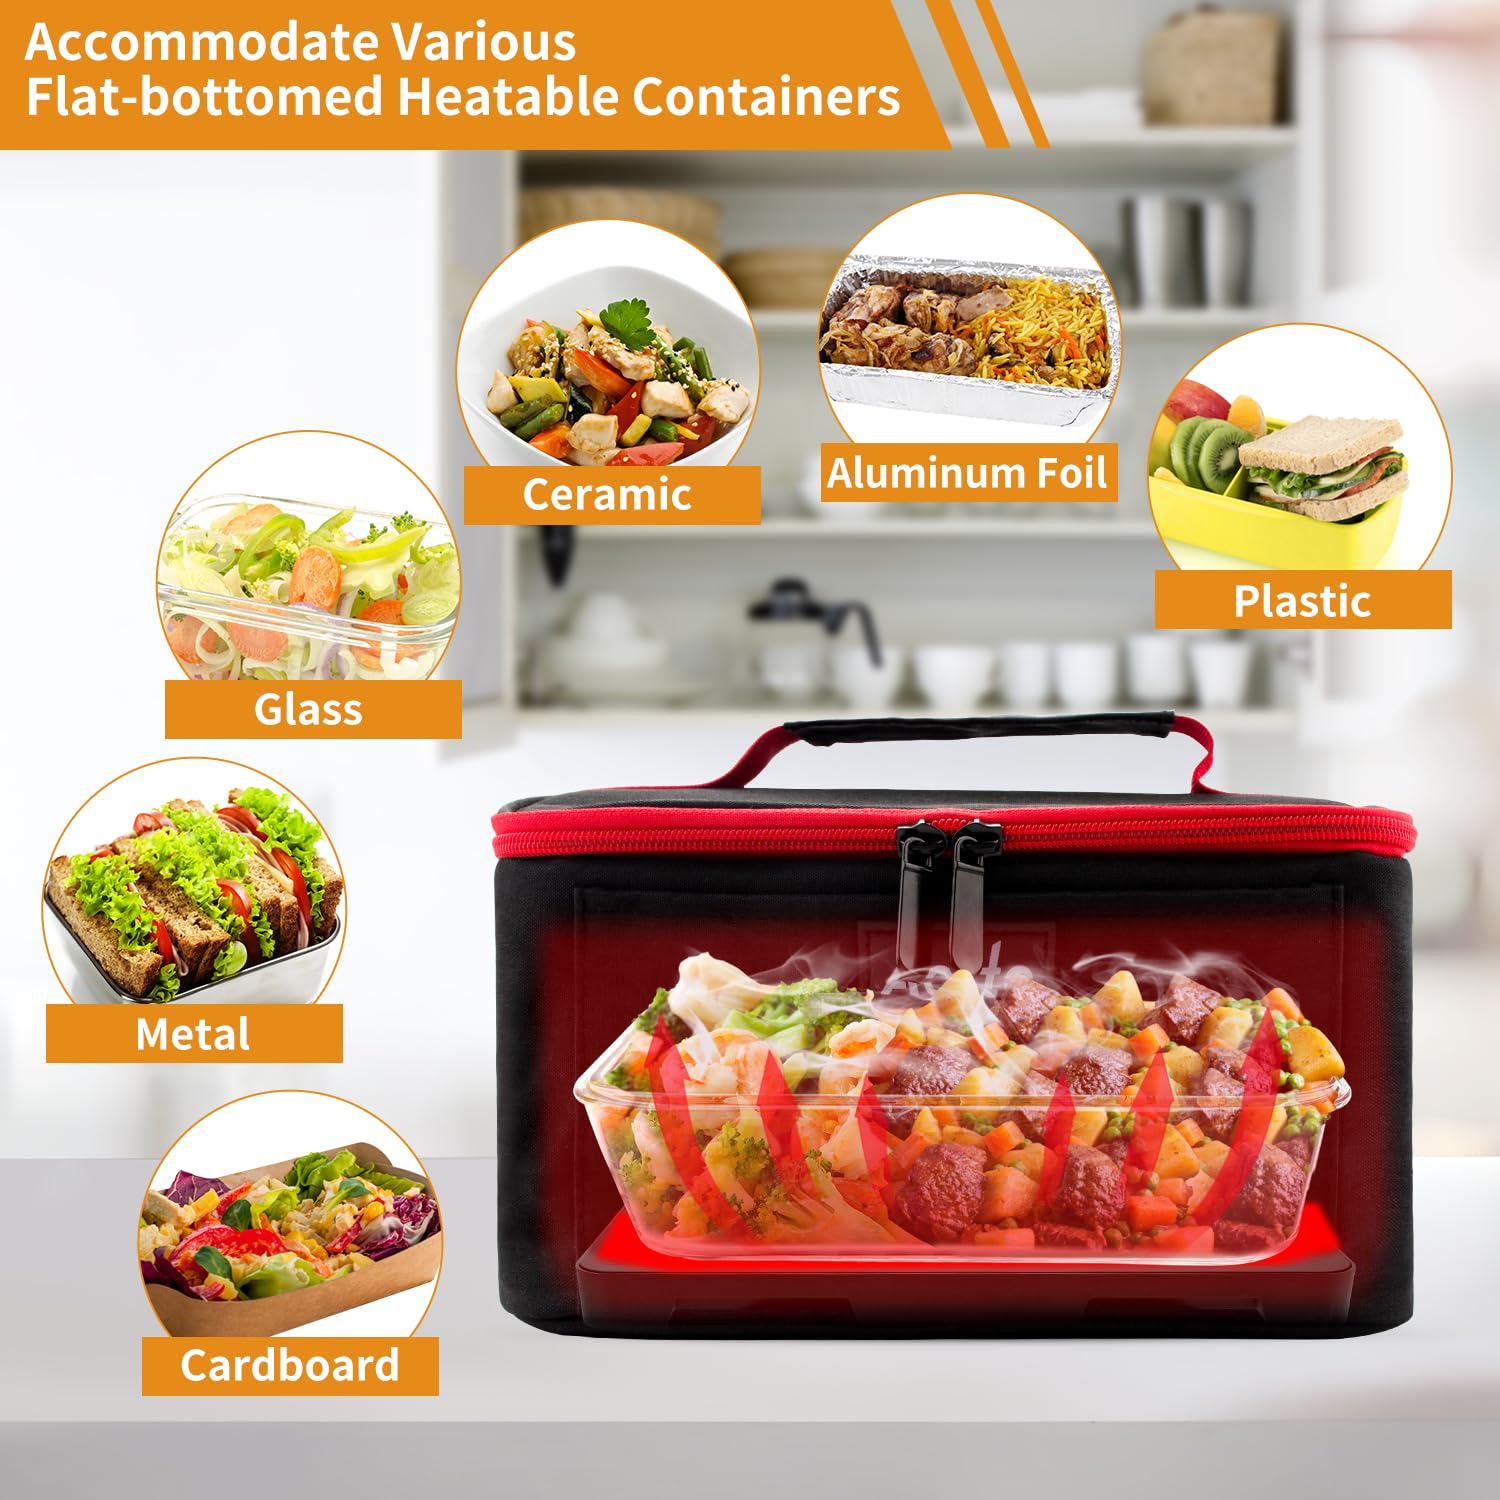 Aotto Portable Oven, 12V, 24V, 110V Food Warmer, Portable Mini Personal Microwave Heated Lunch Box Warmer for Cooking and Reheating Food in Car, Truck, Travel, Camping, Work, Home, Black-Red